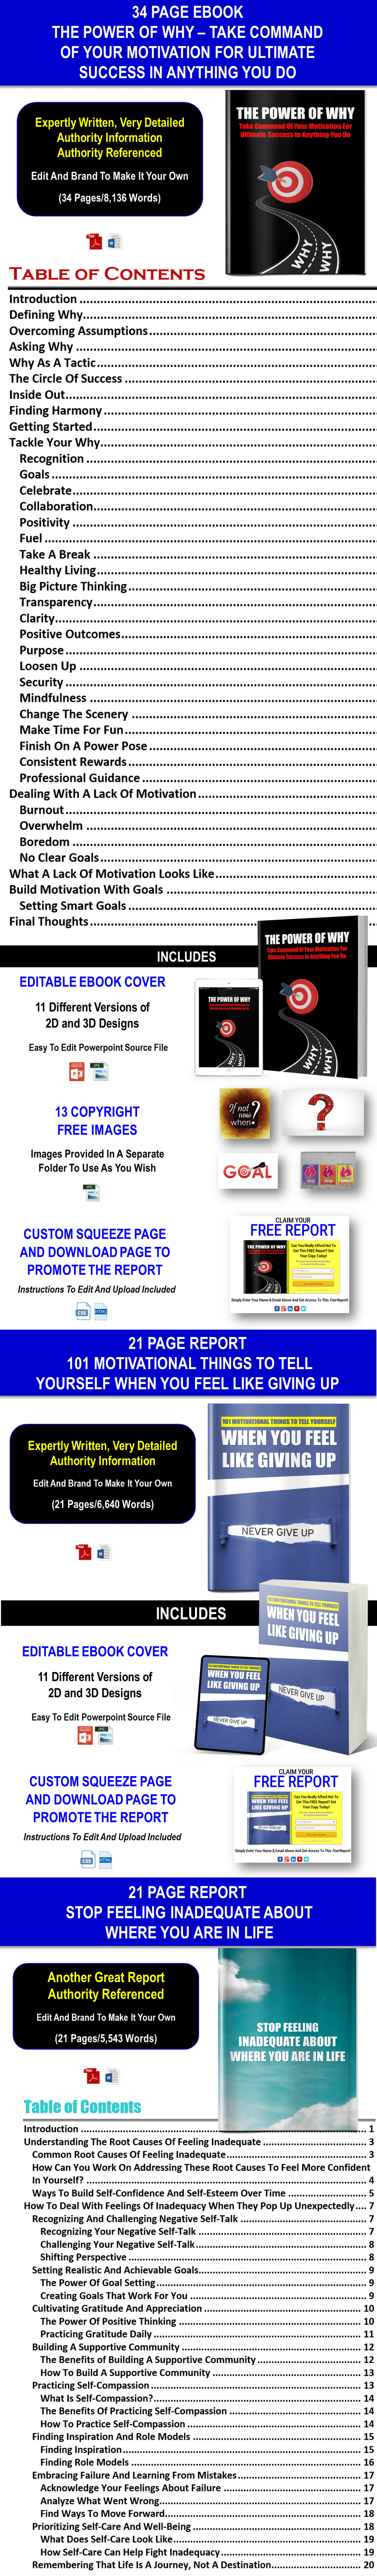 The Power Of Why: Command Your Motivation Giant PLR Giant Content Pack PLR Rights